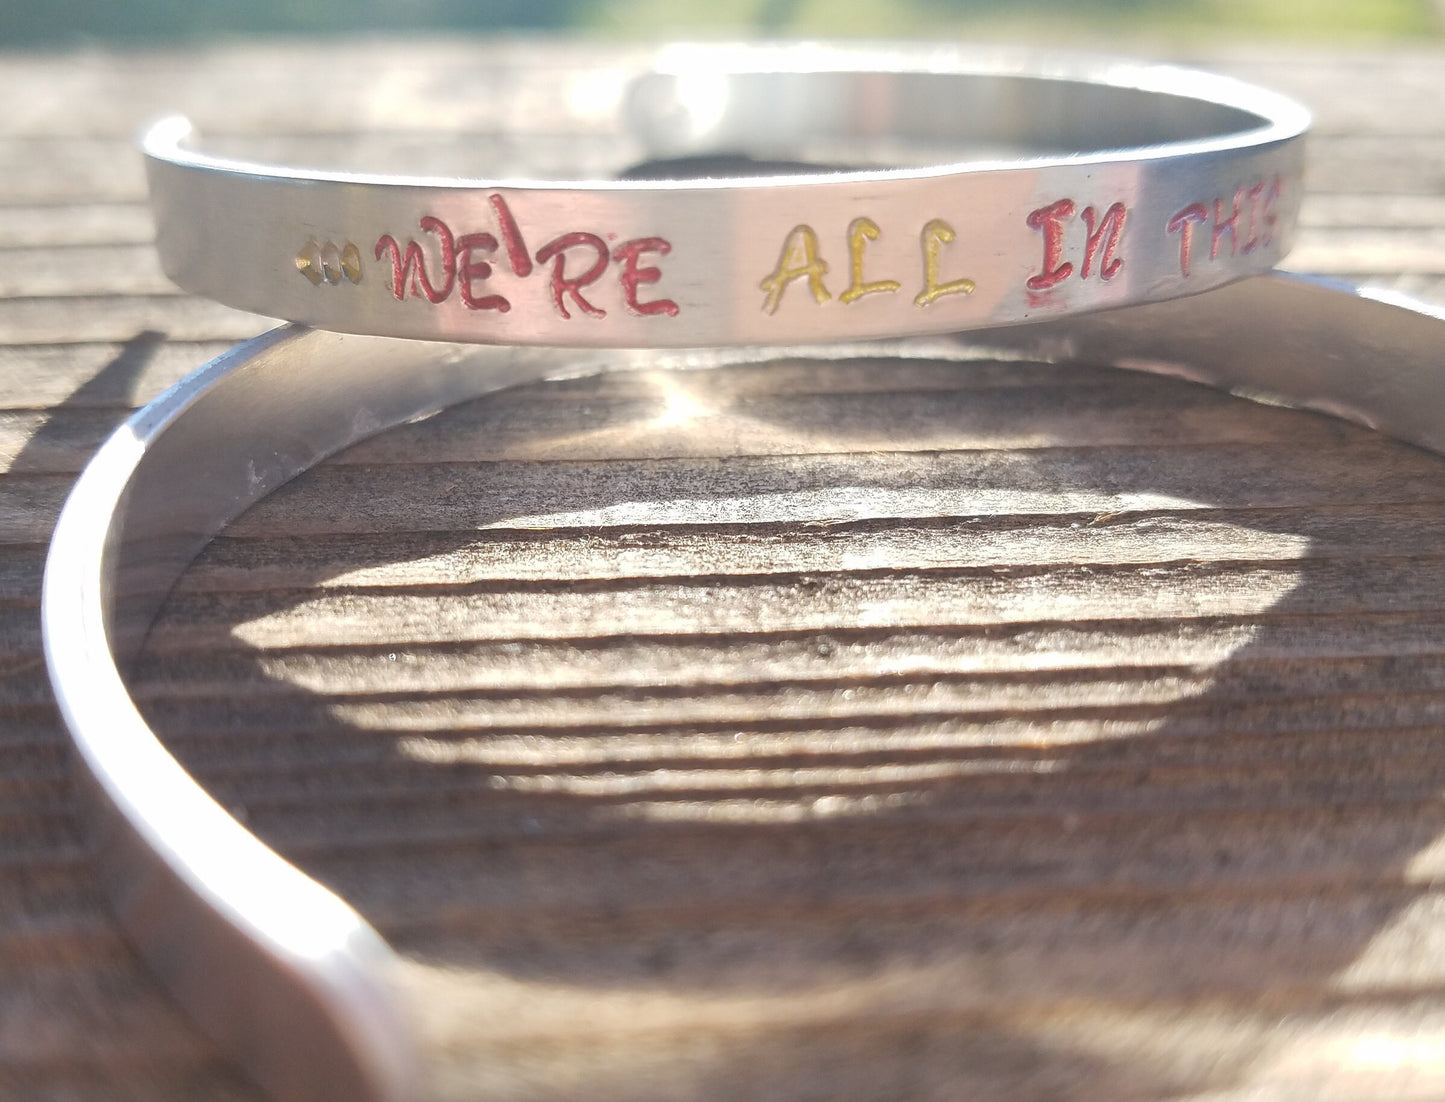 Disney High School Musical Inspired Disney Jewelry, Were All In This Together, Inspirational Bracelet, Quote Bracelet, Disney Quotes